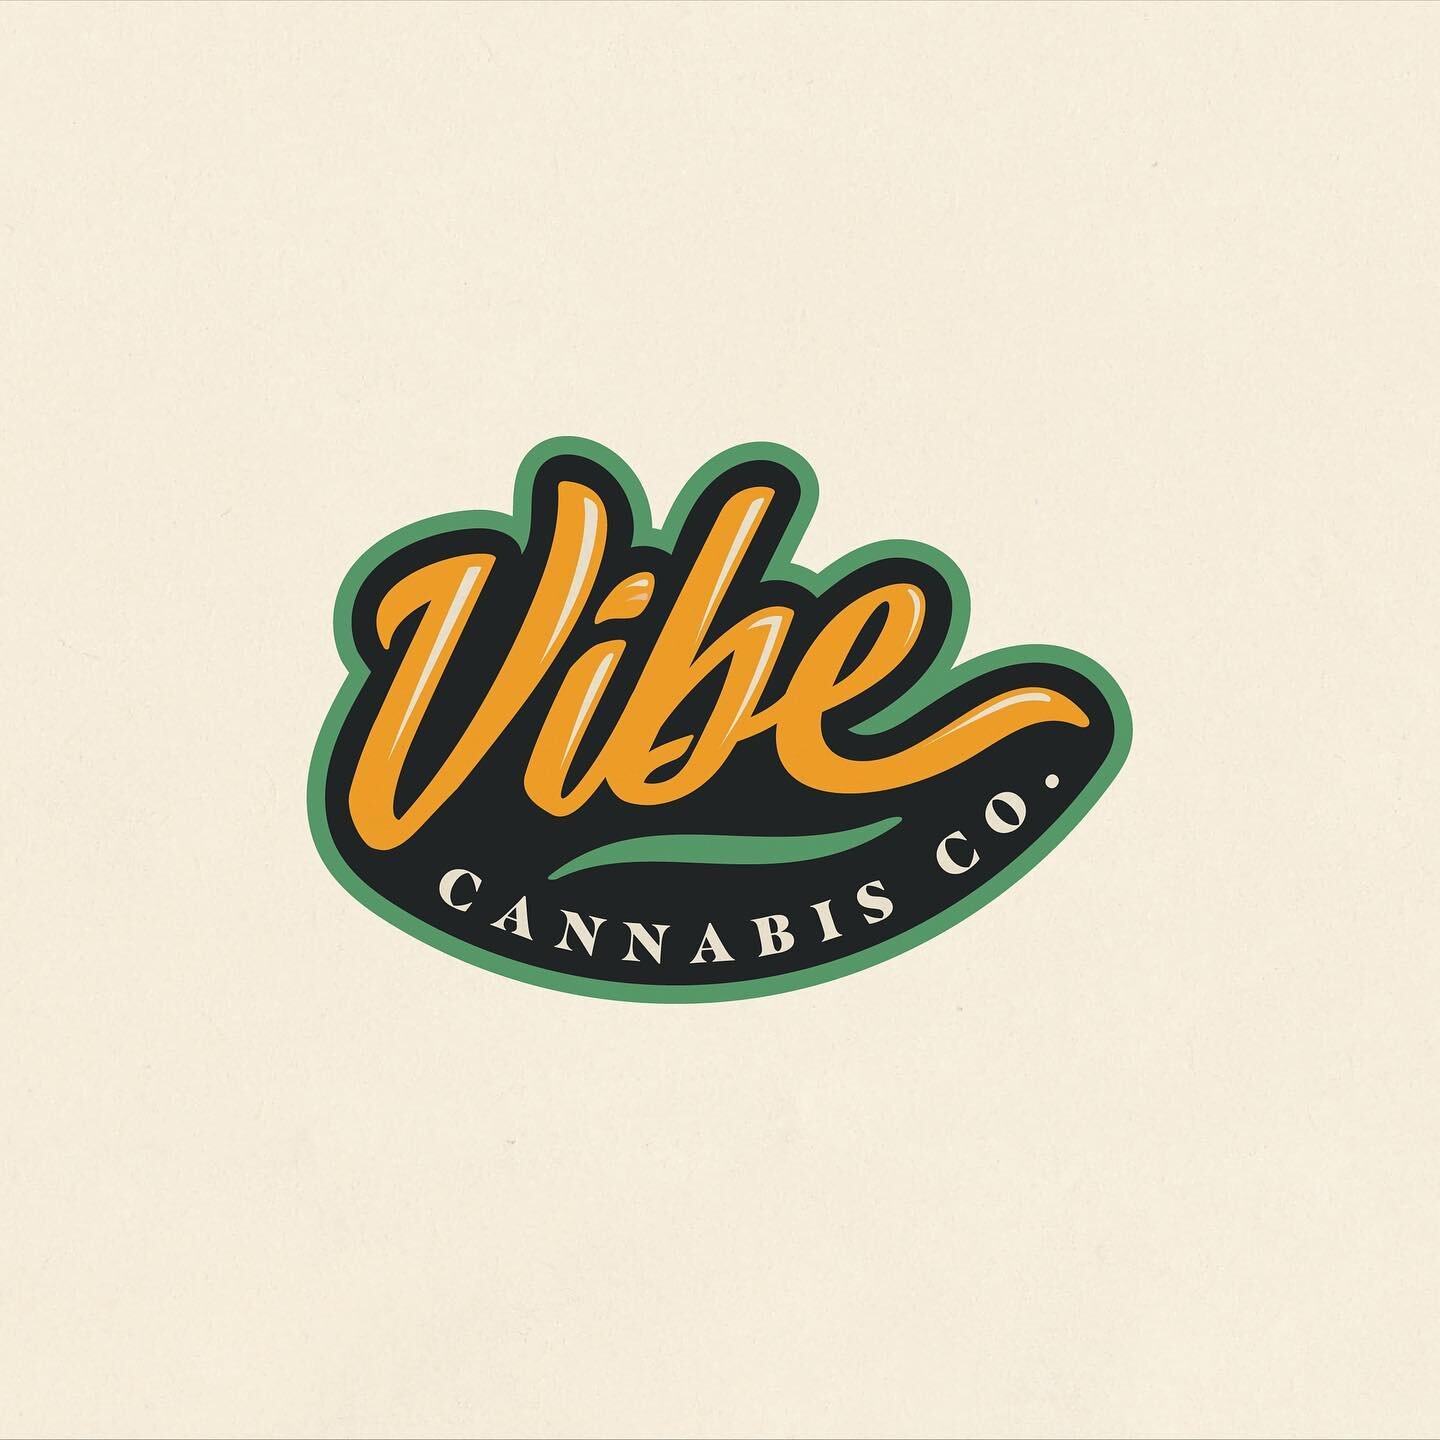 Customized Type Lockup for Vibe Cannabis 🌲 
&mdash;&mdash;
Vibe was looking for a recognizable script that would stand out in their space. Super happy with what we came up with. Thanks Ryan!
&mdash;&mdash;
@vibe_kelso 
&mdash;&mdash;
&bull;
&bull;
&